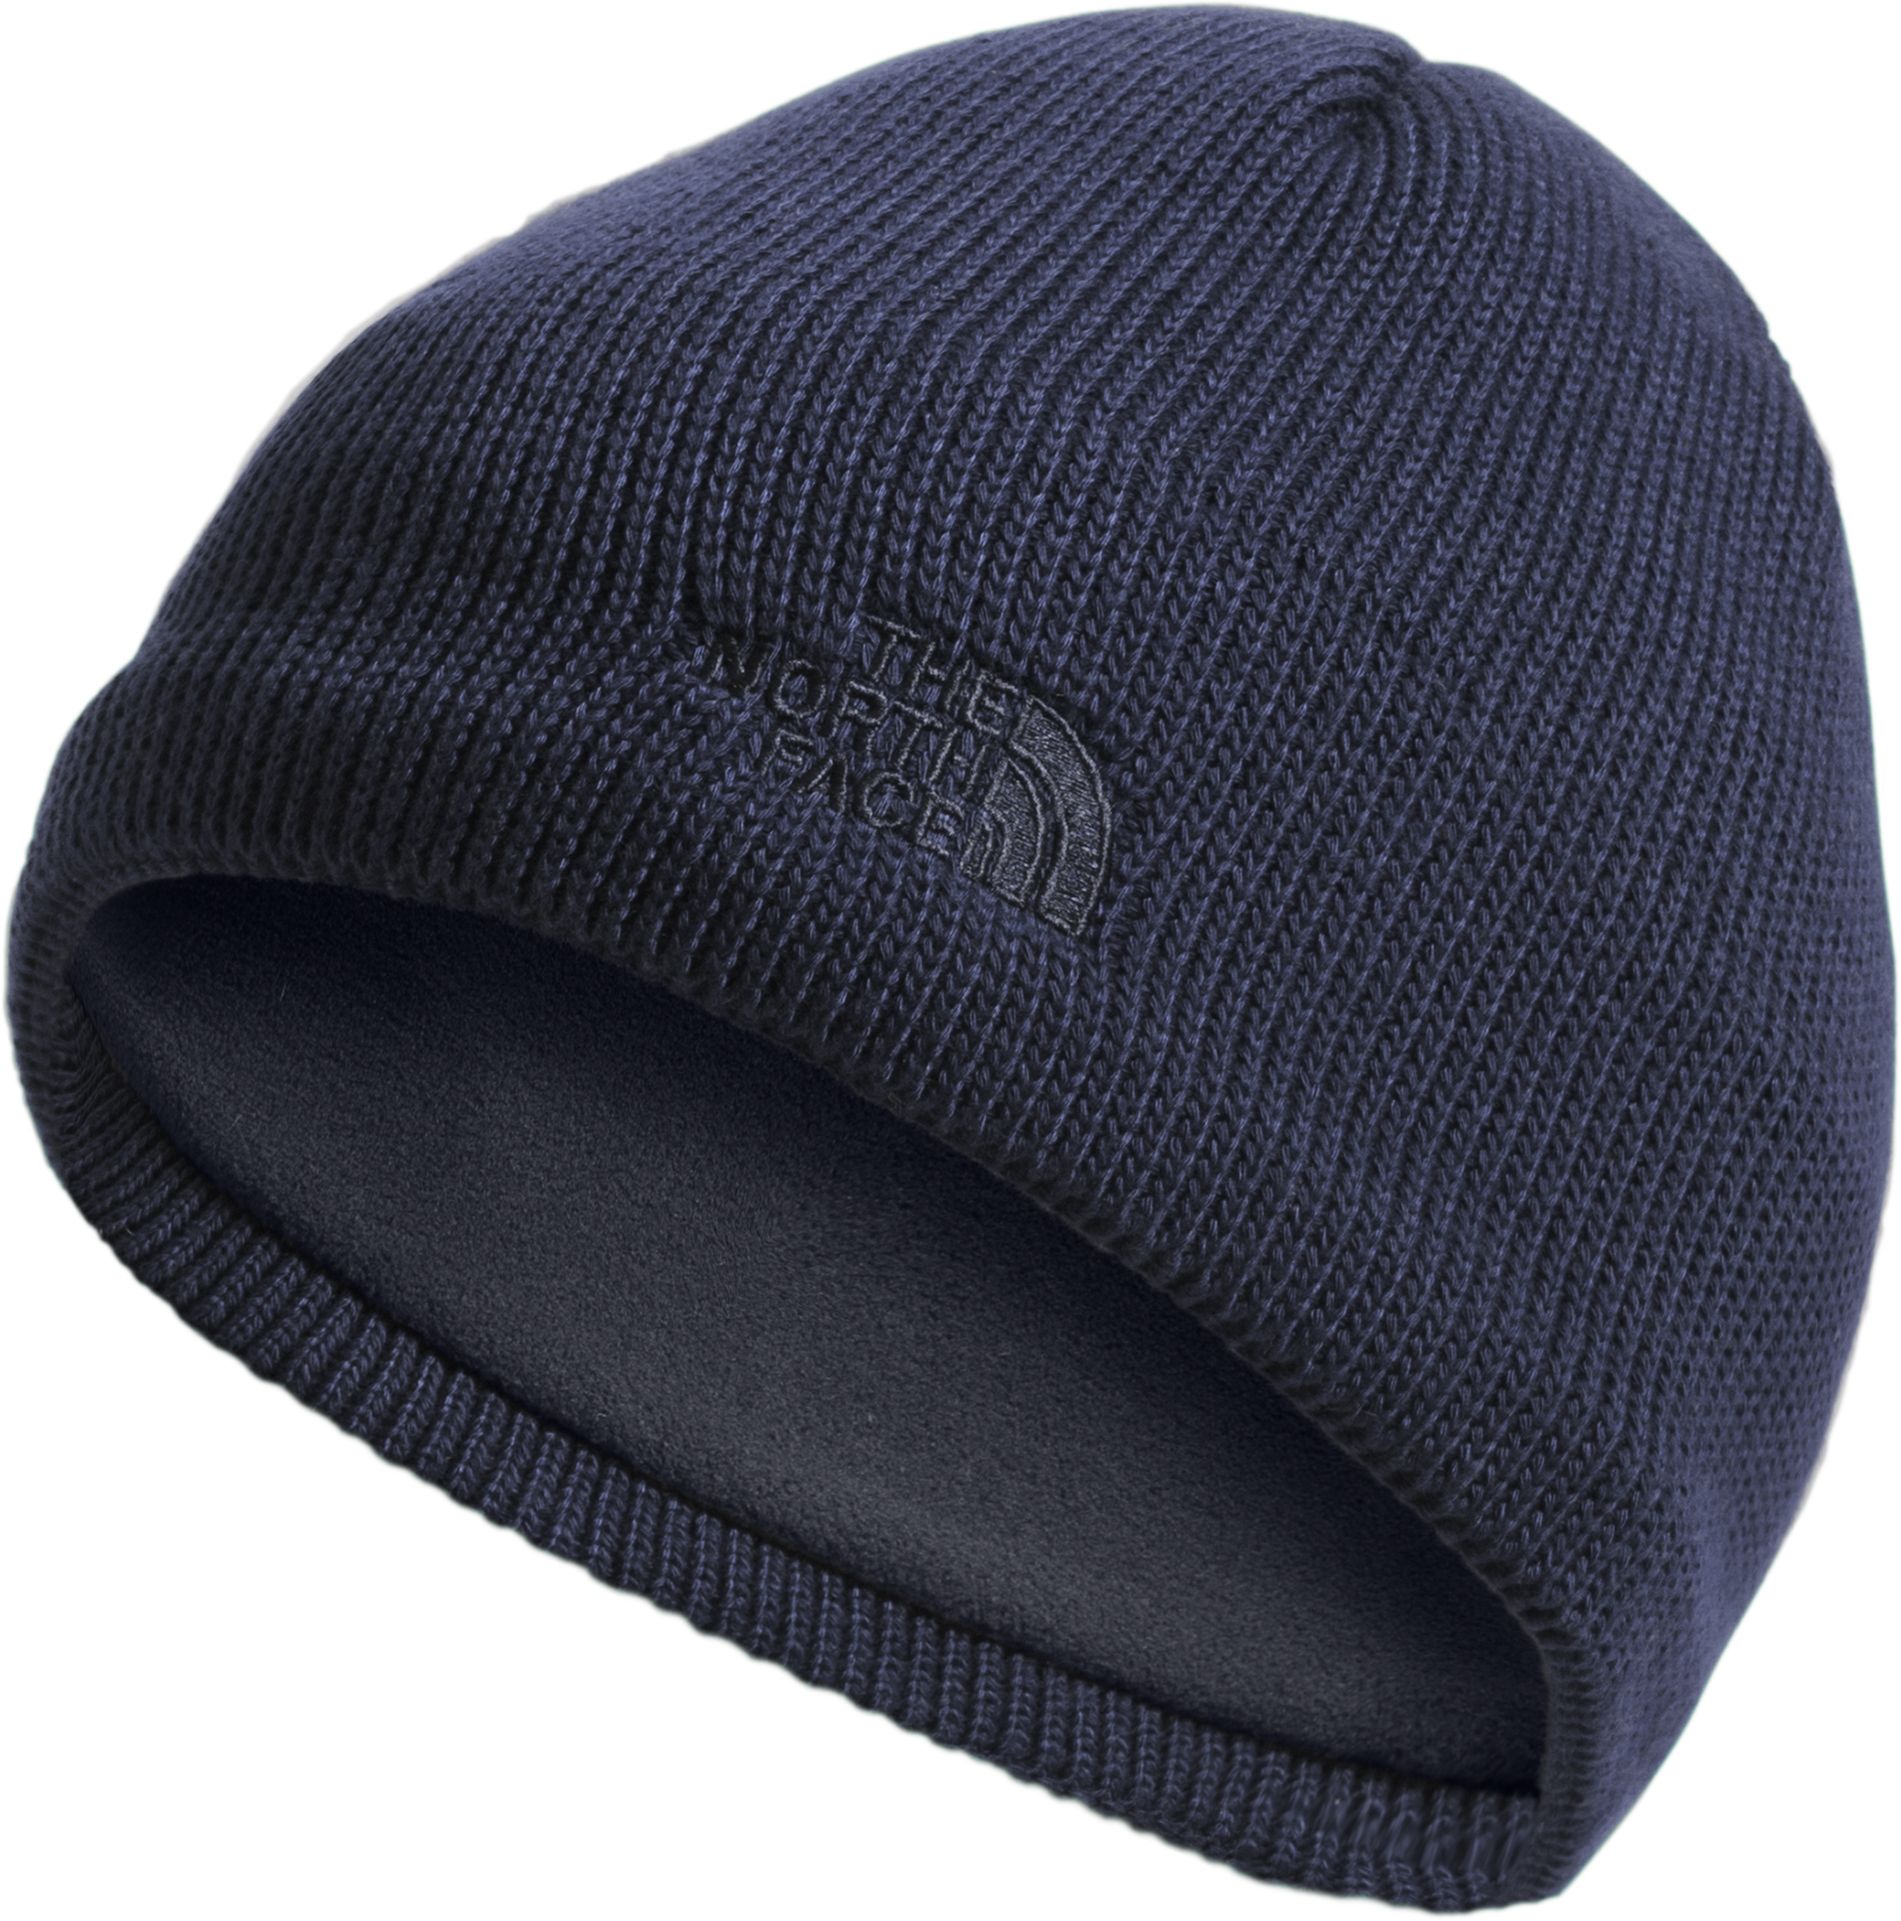 north face hats near me